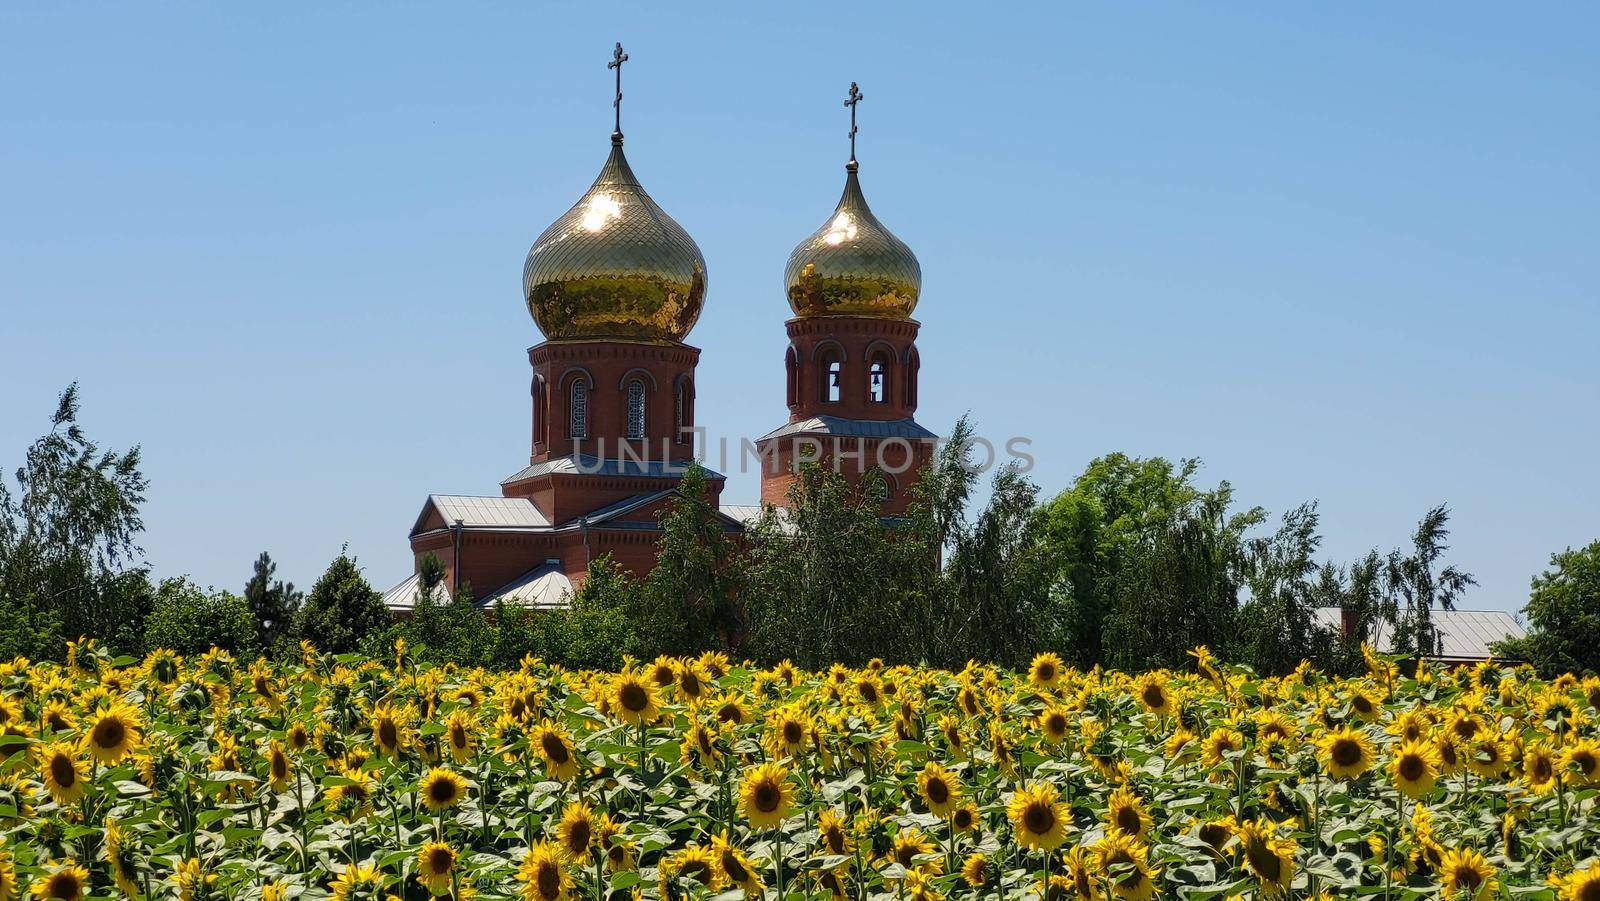 Orthodox church with golden domes in the middle of a field with sunflowers by lapushka62